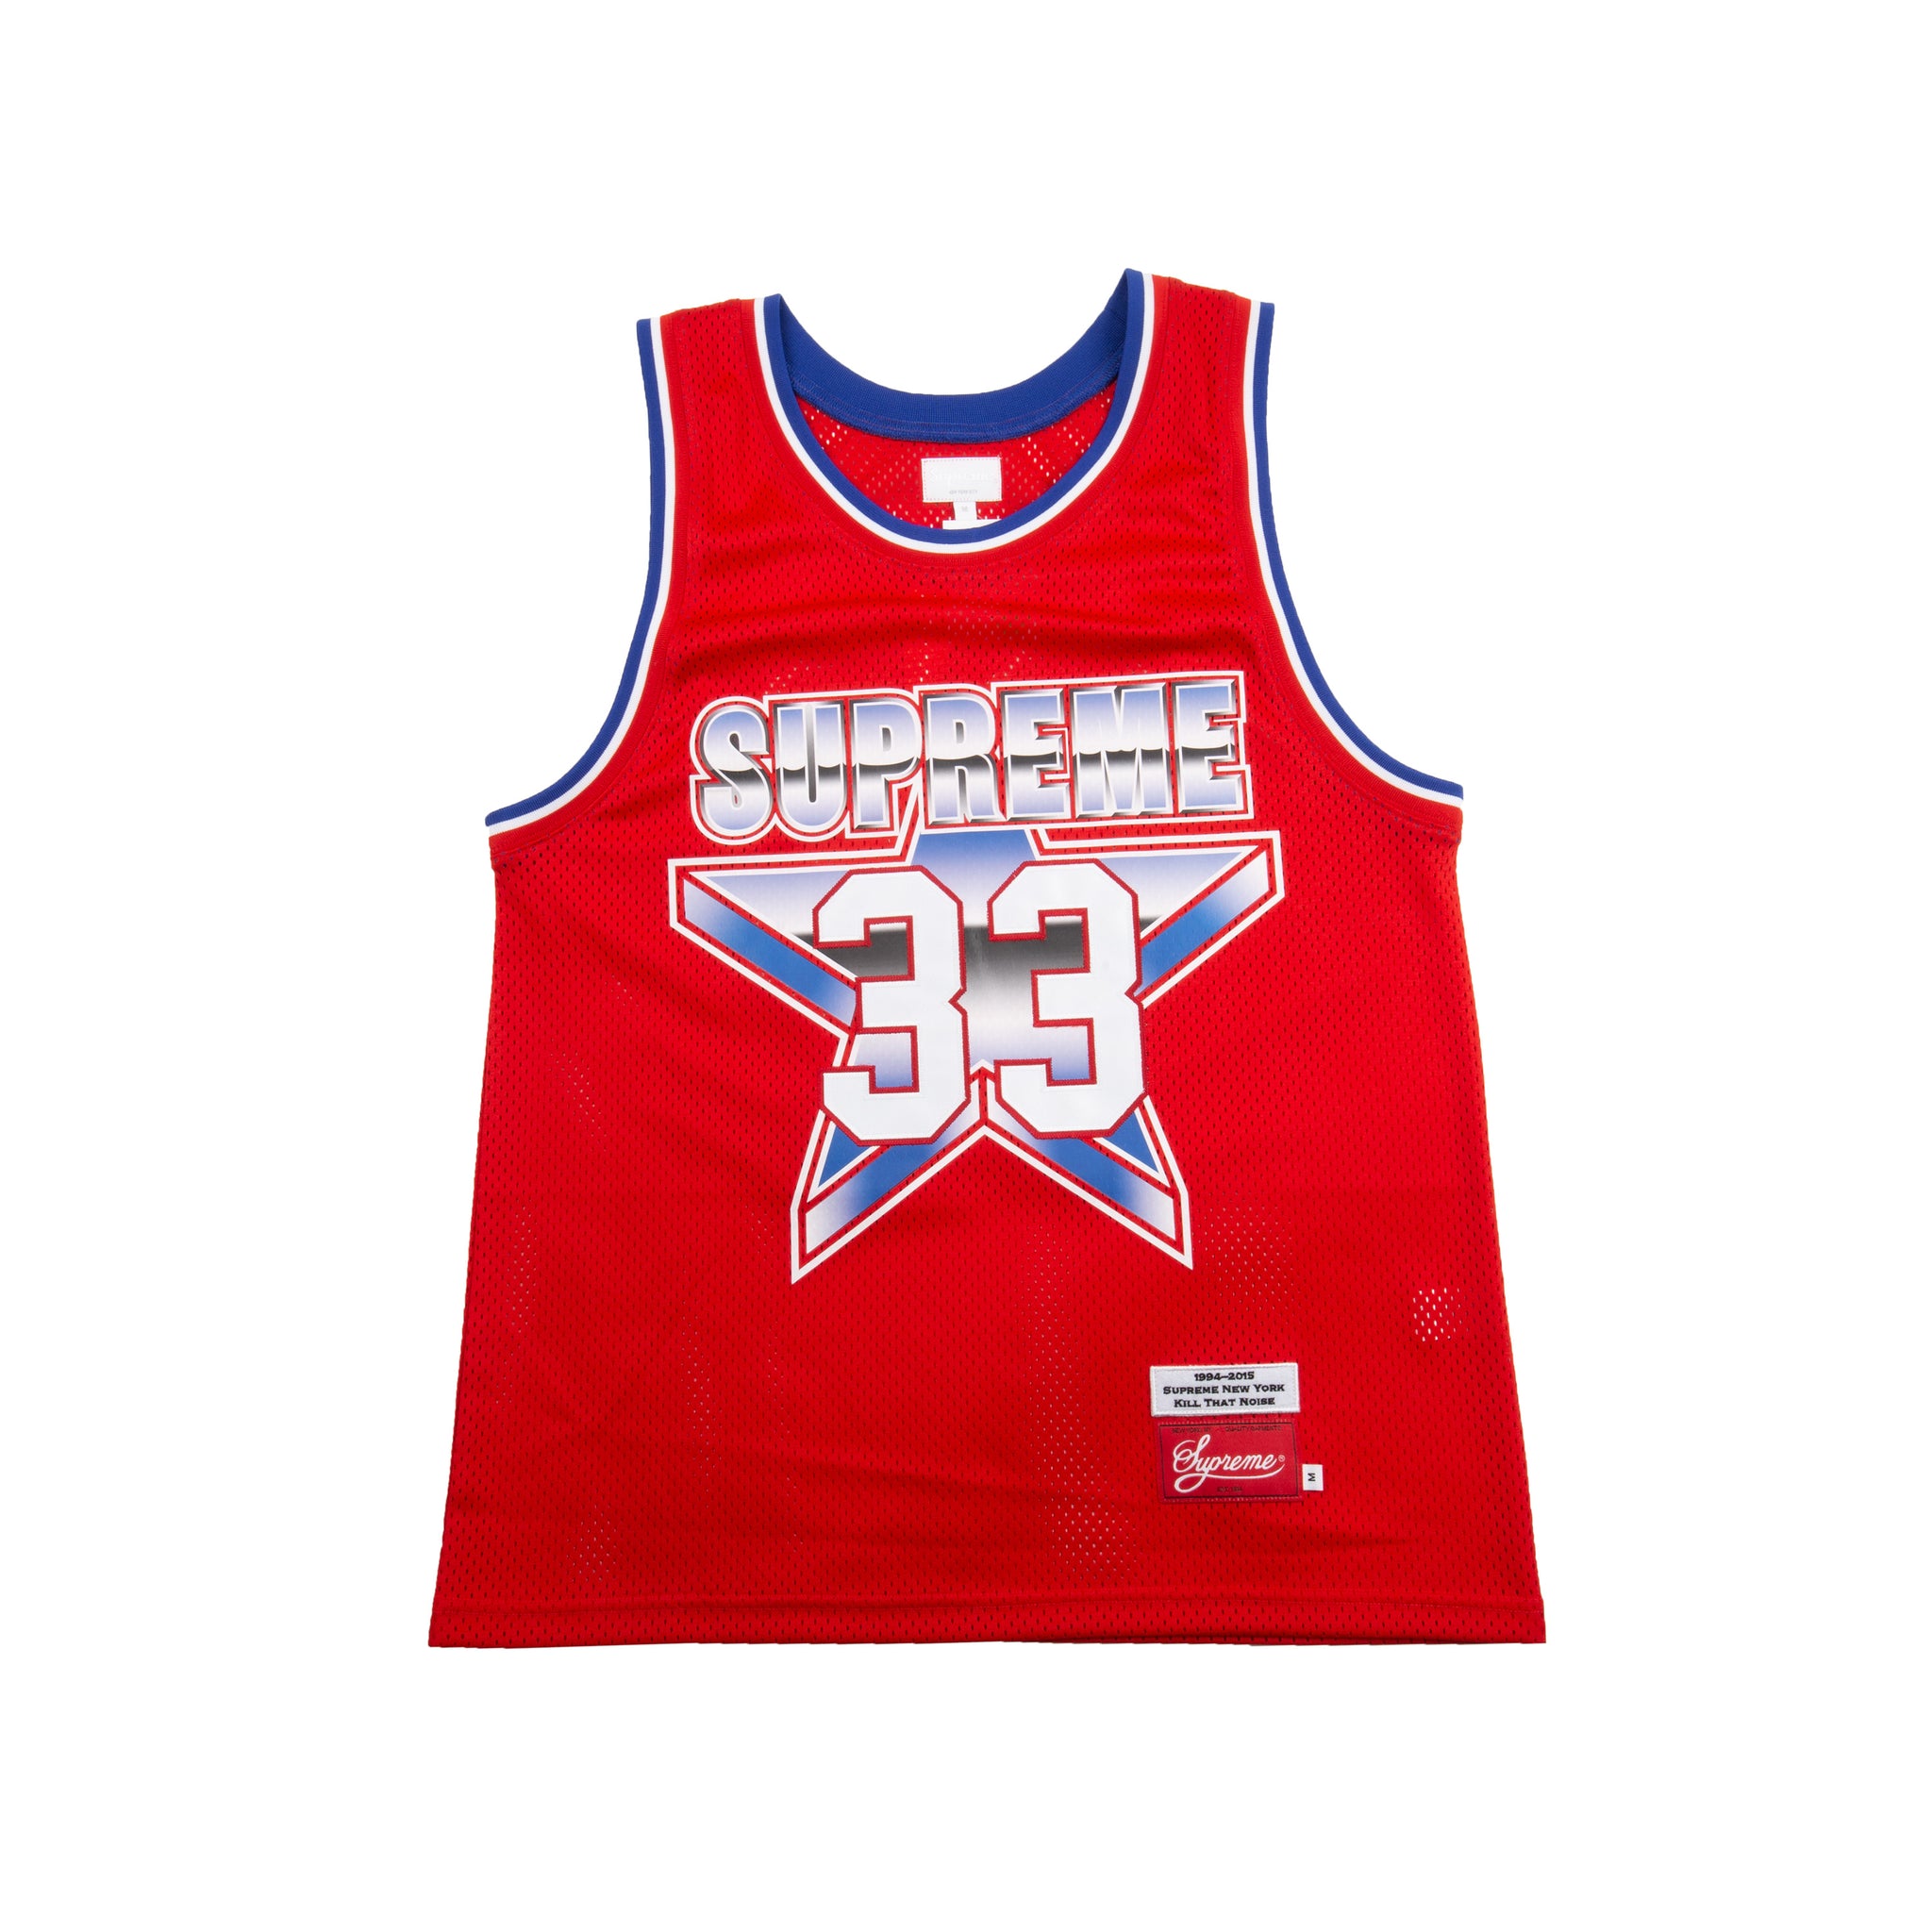 Supreme Red All Star Basketball Jersey – On The Arm